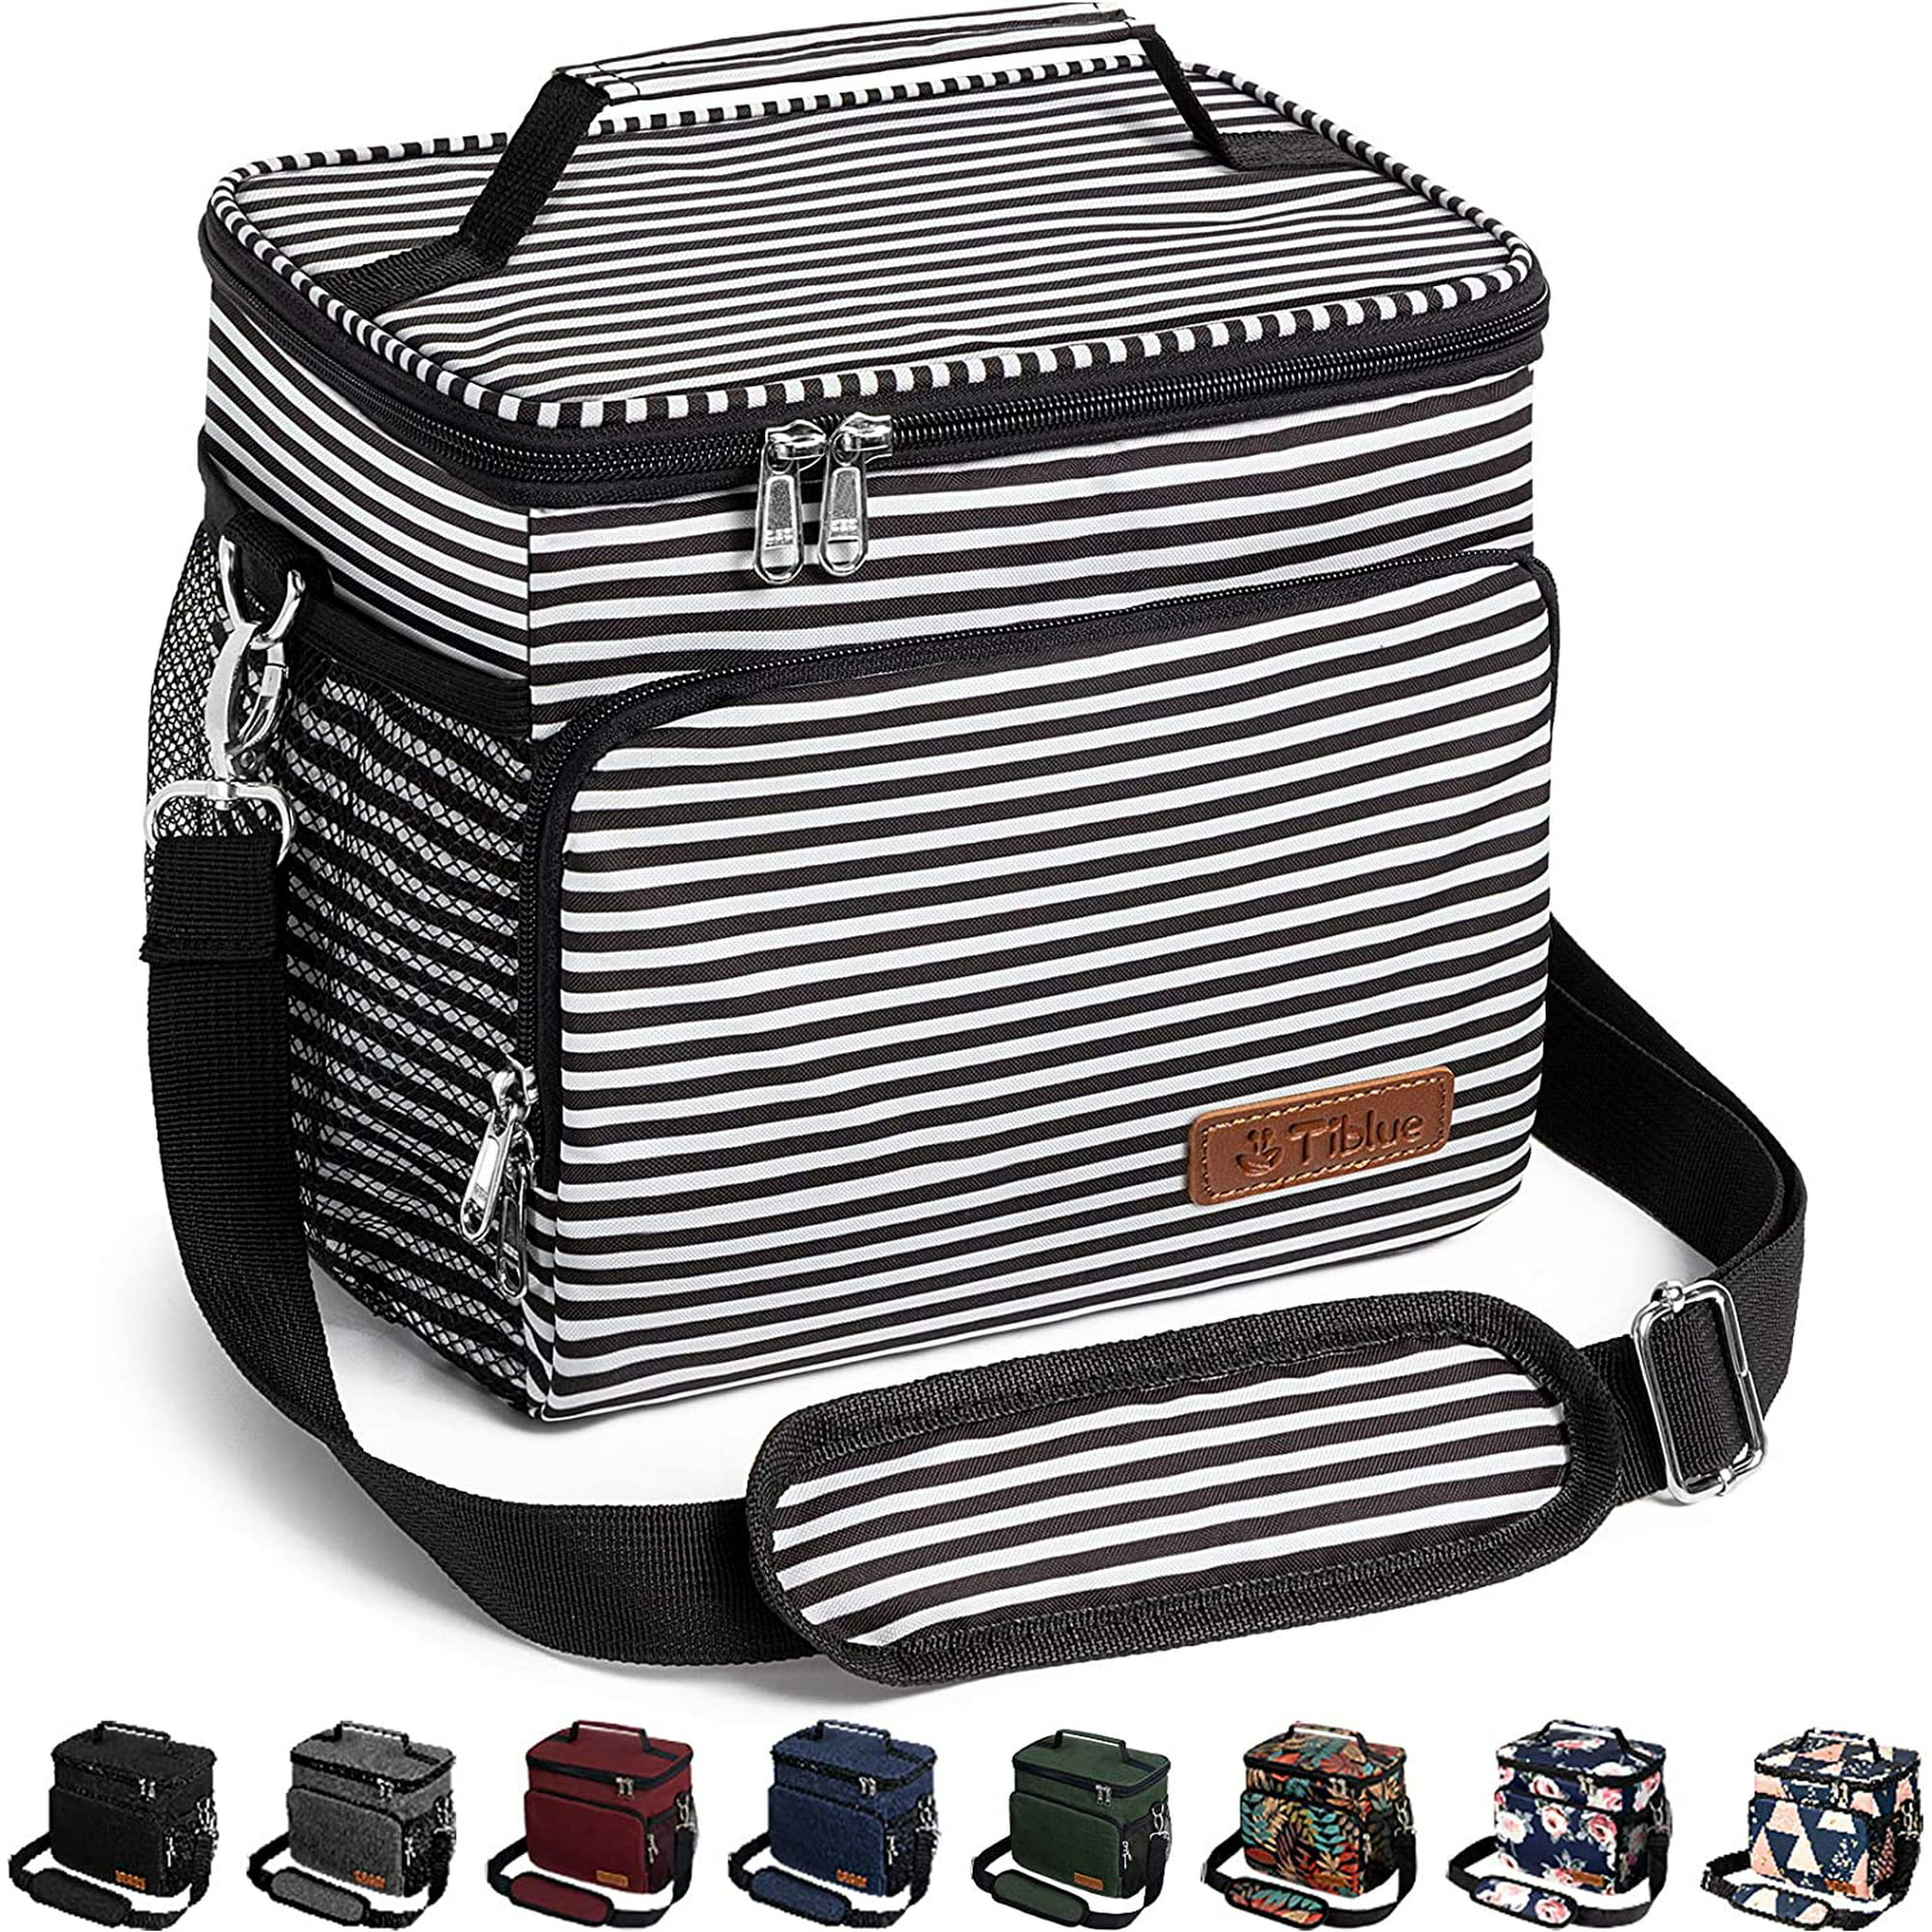 Leakproof Cooler Tote Bag Freezable Lunch Bag with Adjustable Shoulder Strap for Adult Insulated Lunch Bag for Women/Men Reusable Lunch Box for Office Work Picnic Beach